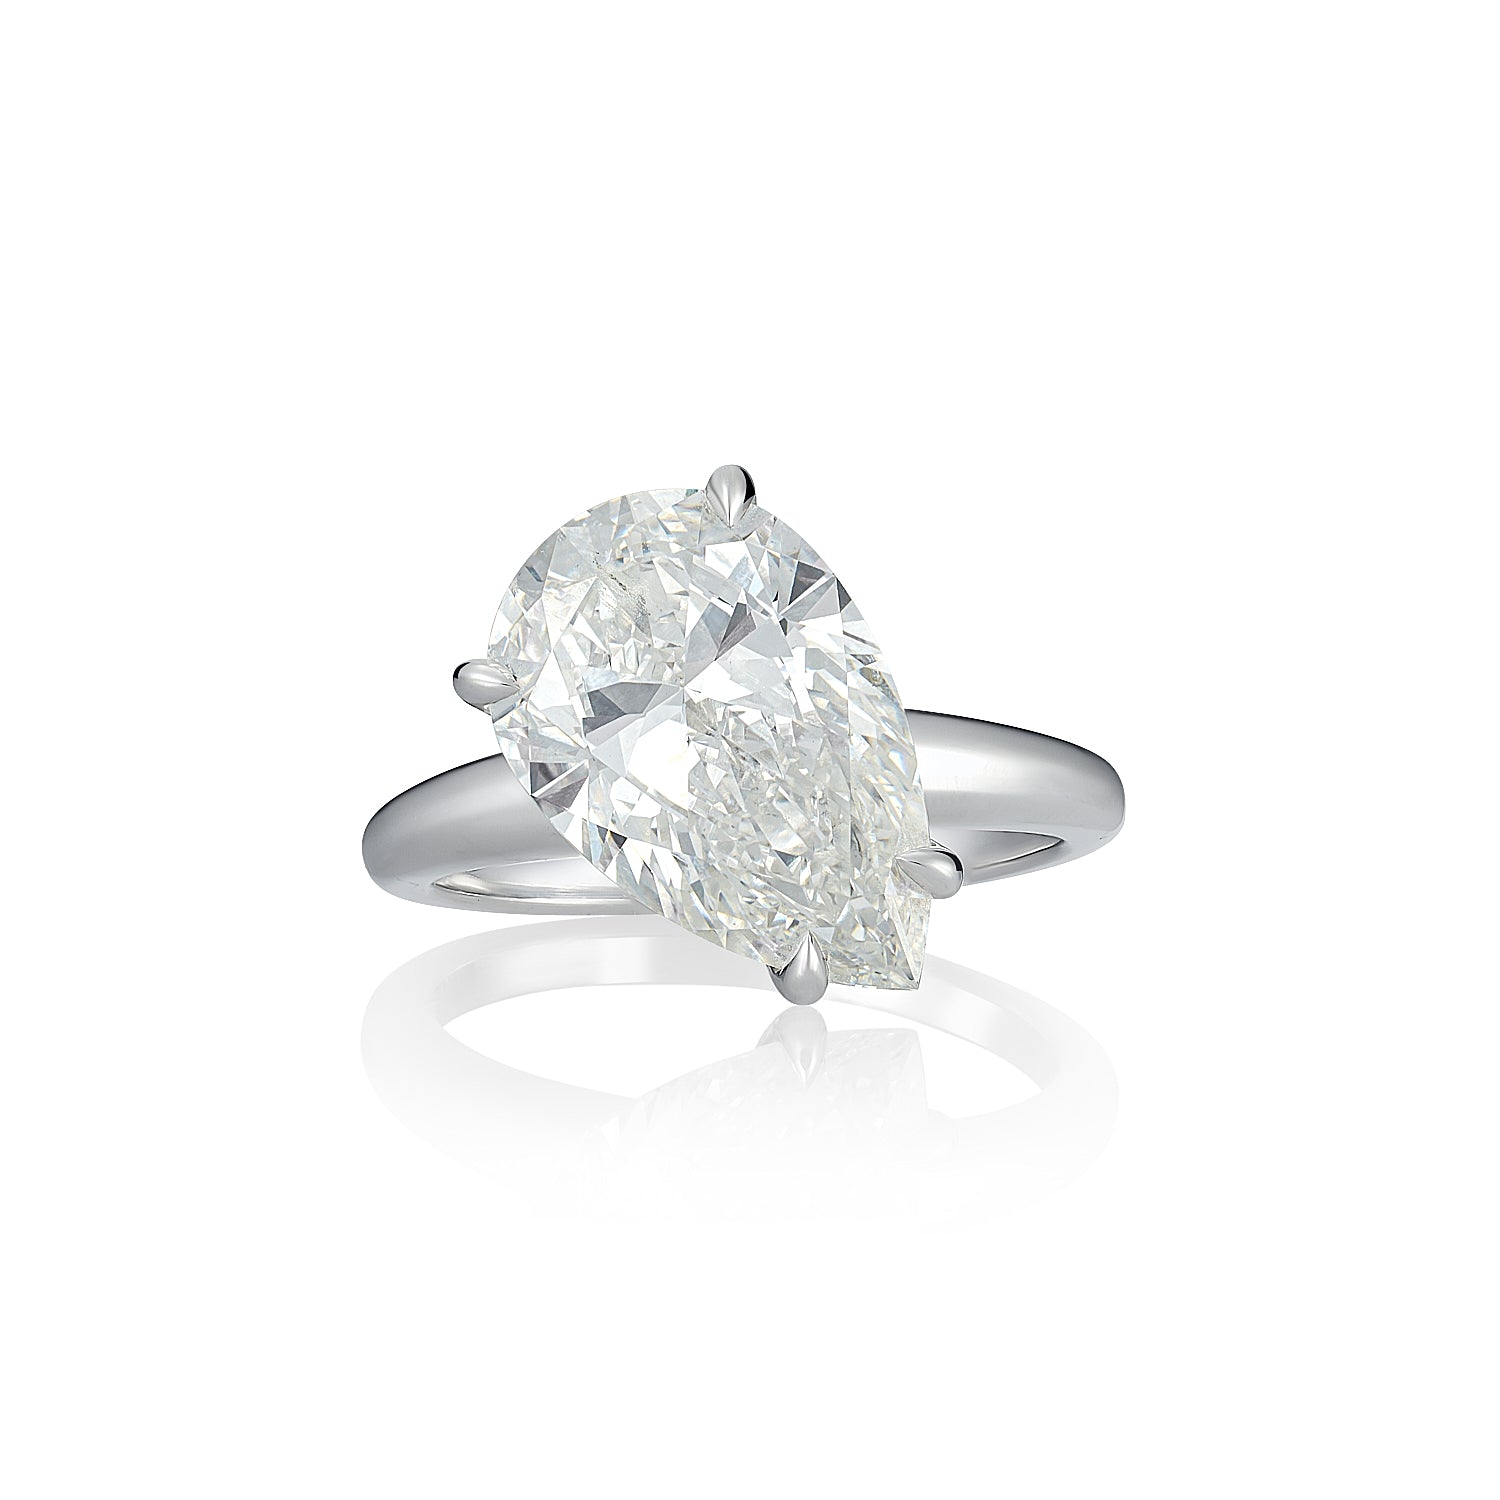 The Off-Axis Pear Diamond Ring (platinum)